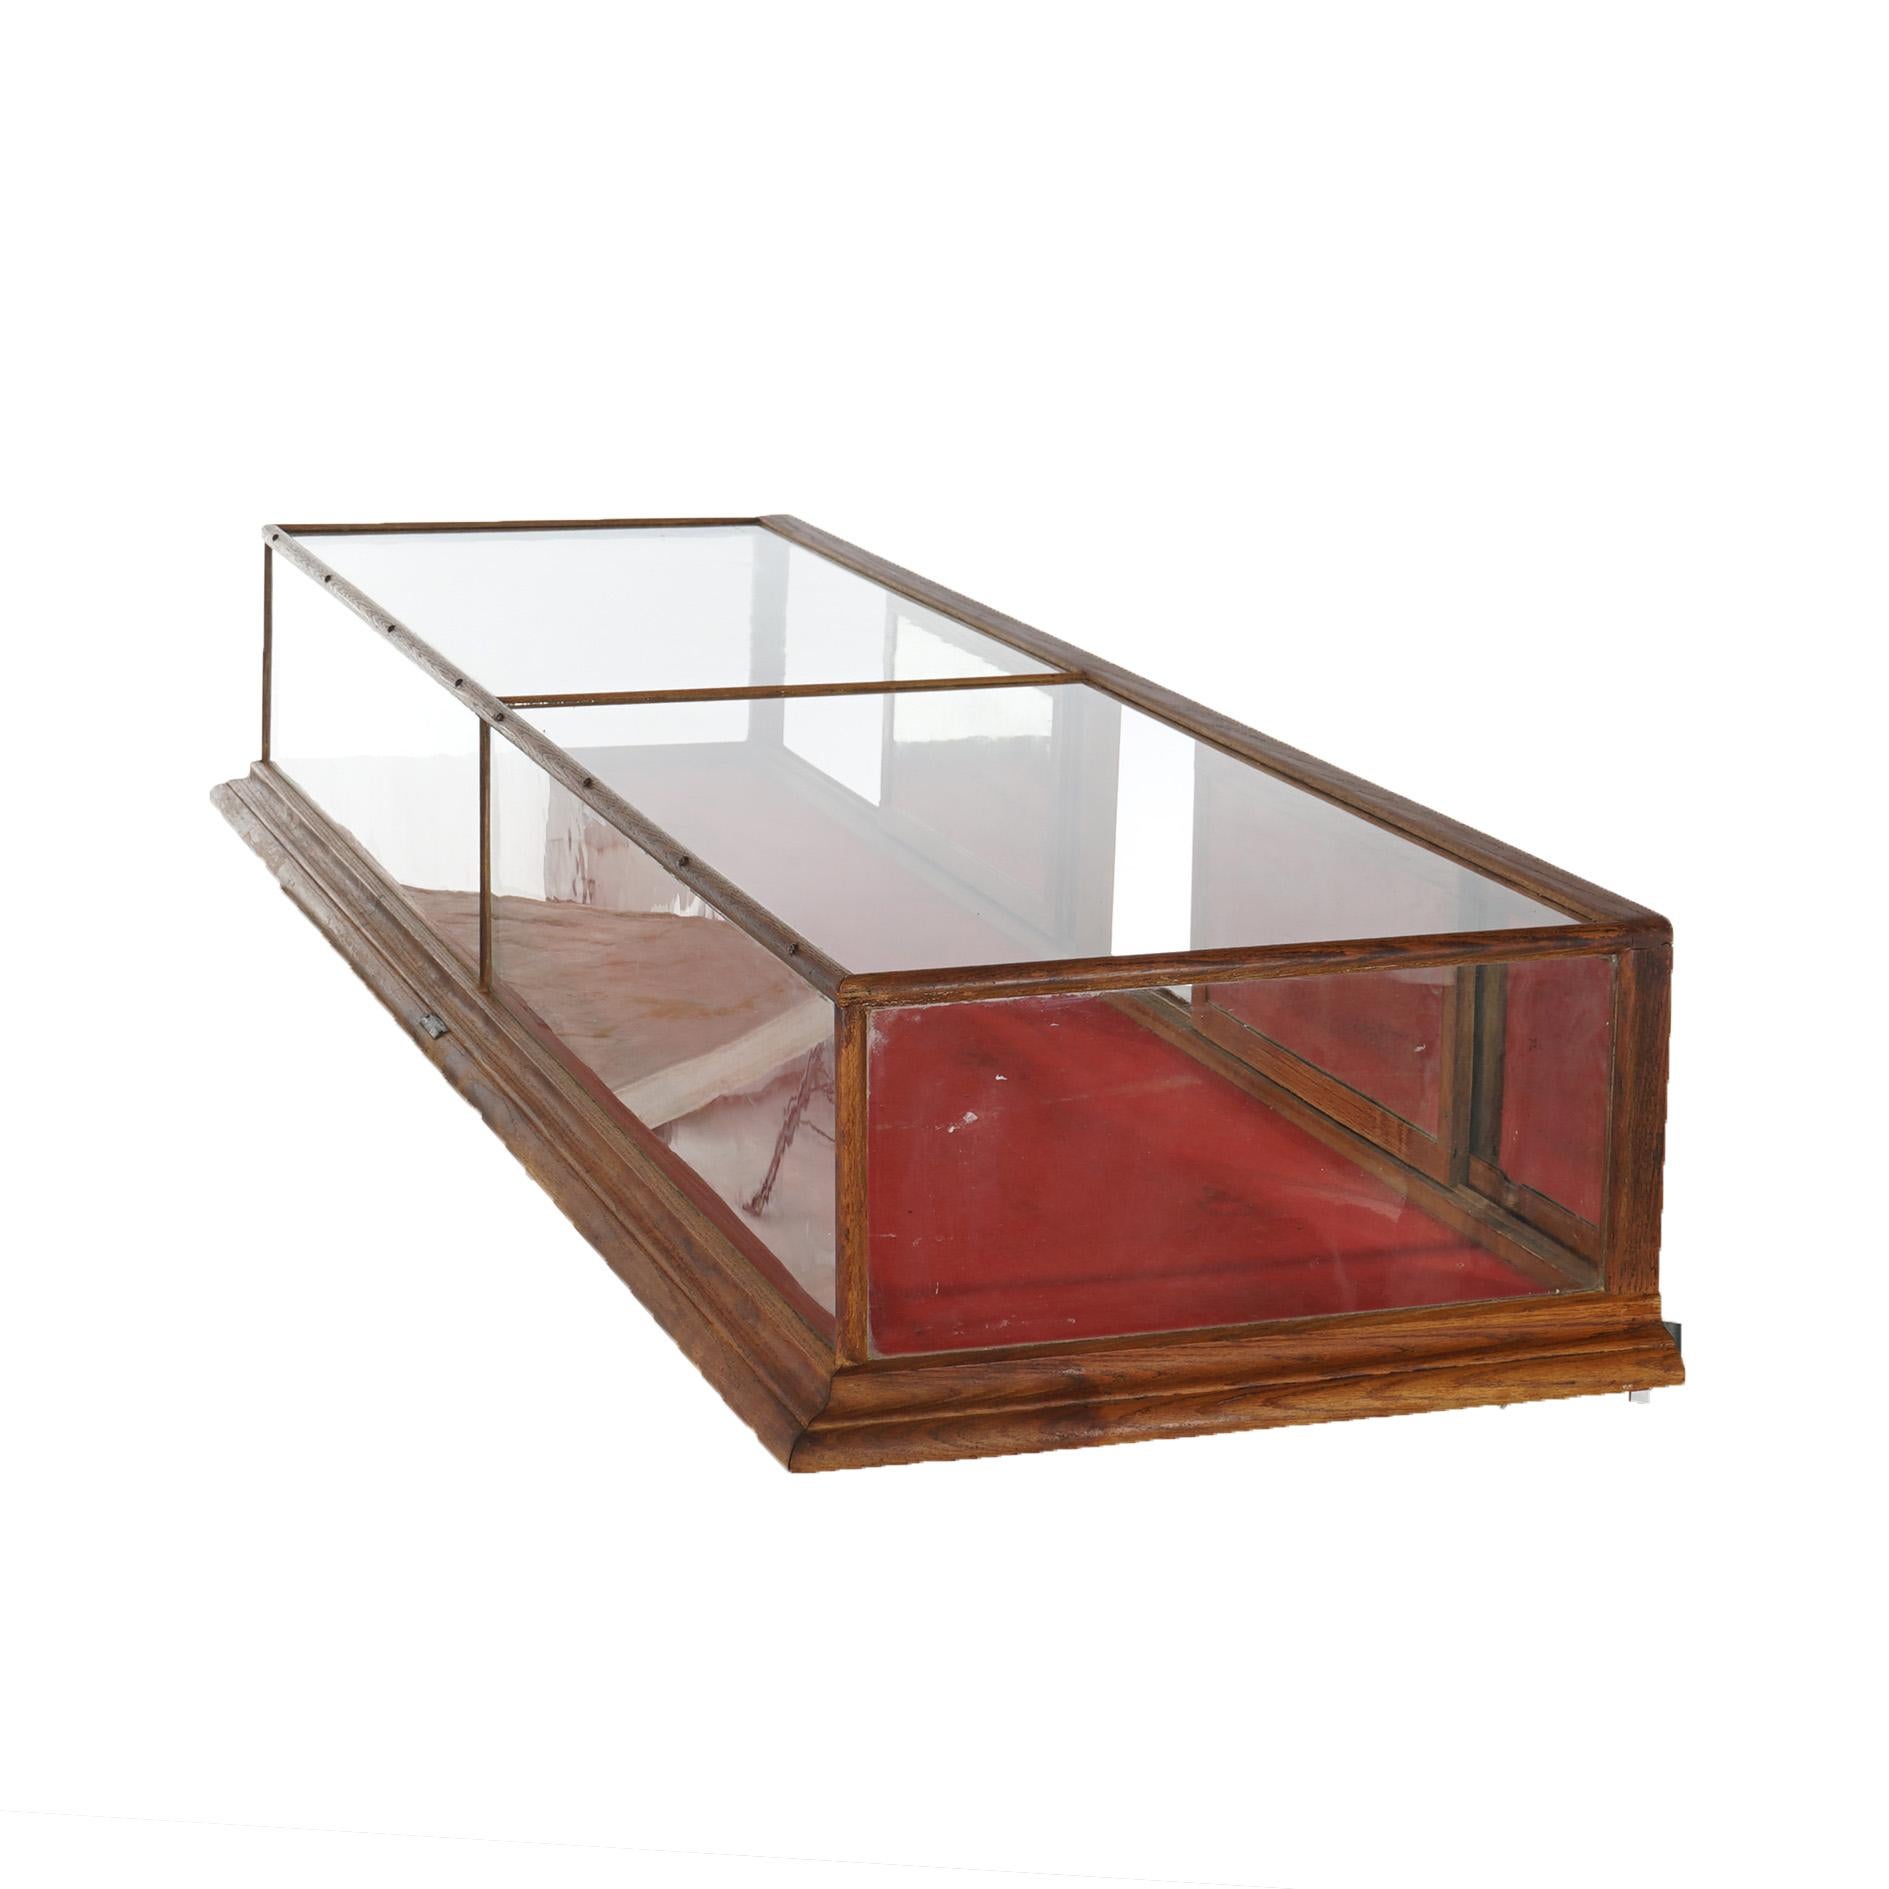 Antique Country Store Buffalo Candy Co. 8’ Oak Table Top Display Case Circa 1900 For Sale 5